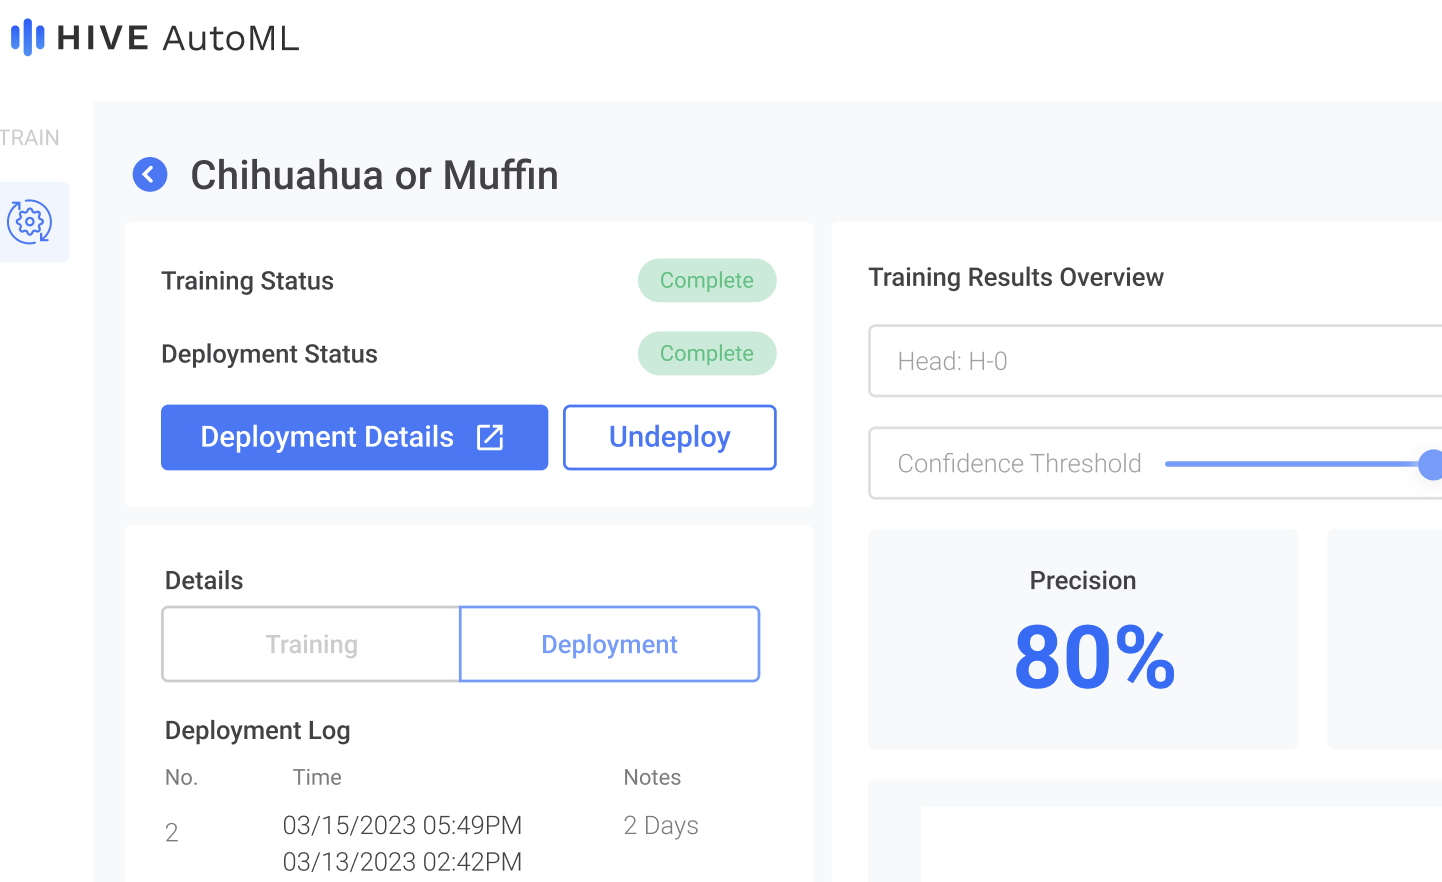 After a a project has finished deploying, there will be a "Deployment Details" button on the left side of the project page, below the training and deployment statuses.